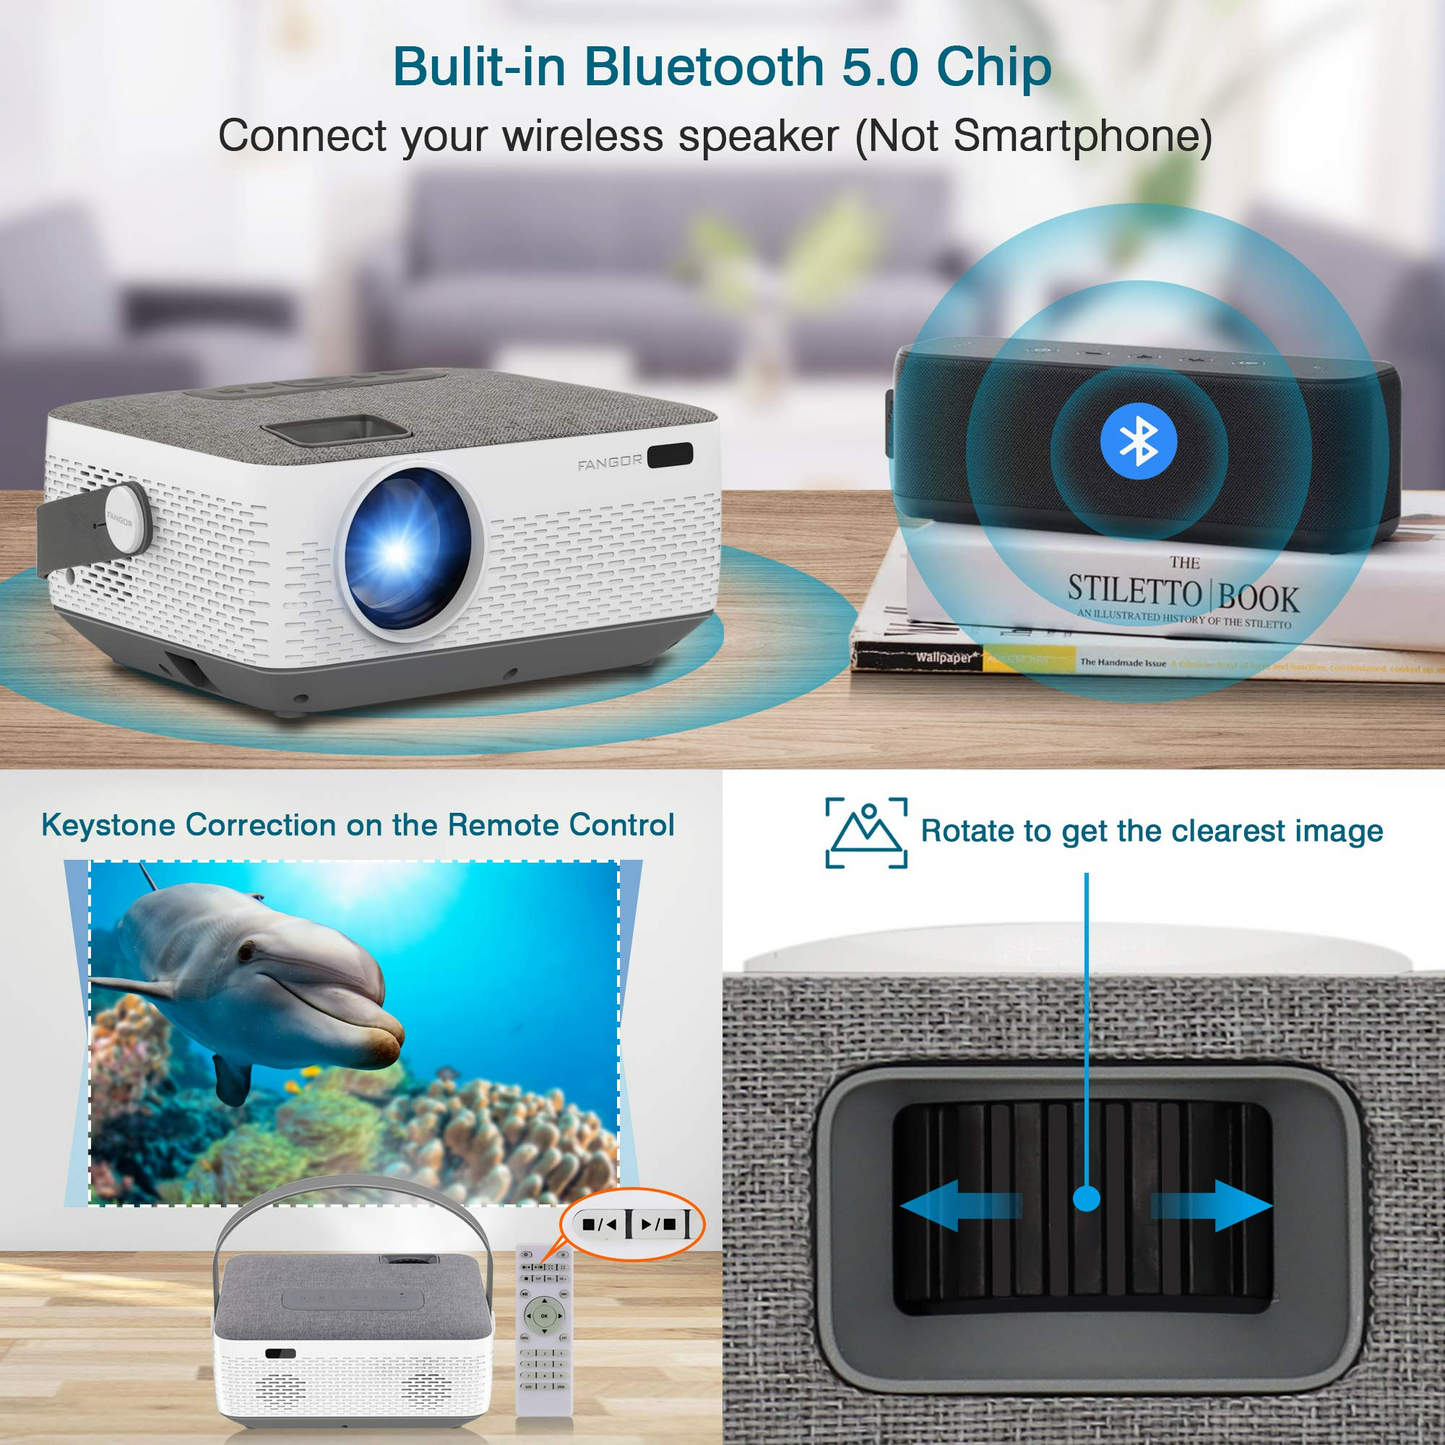 WiFi Projector Bluetooth 8400mAh Battery, Rechargeable Portable Home Projector, FANGOR 1080P Supported Movie Projector with Sync Smartphone Screen via WiFi/USB Cable, Compatible with iPhone, Laptop